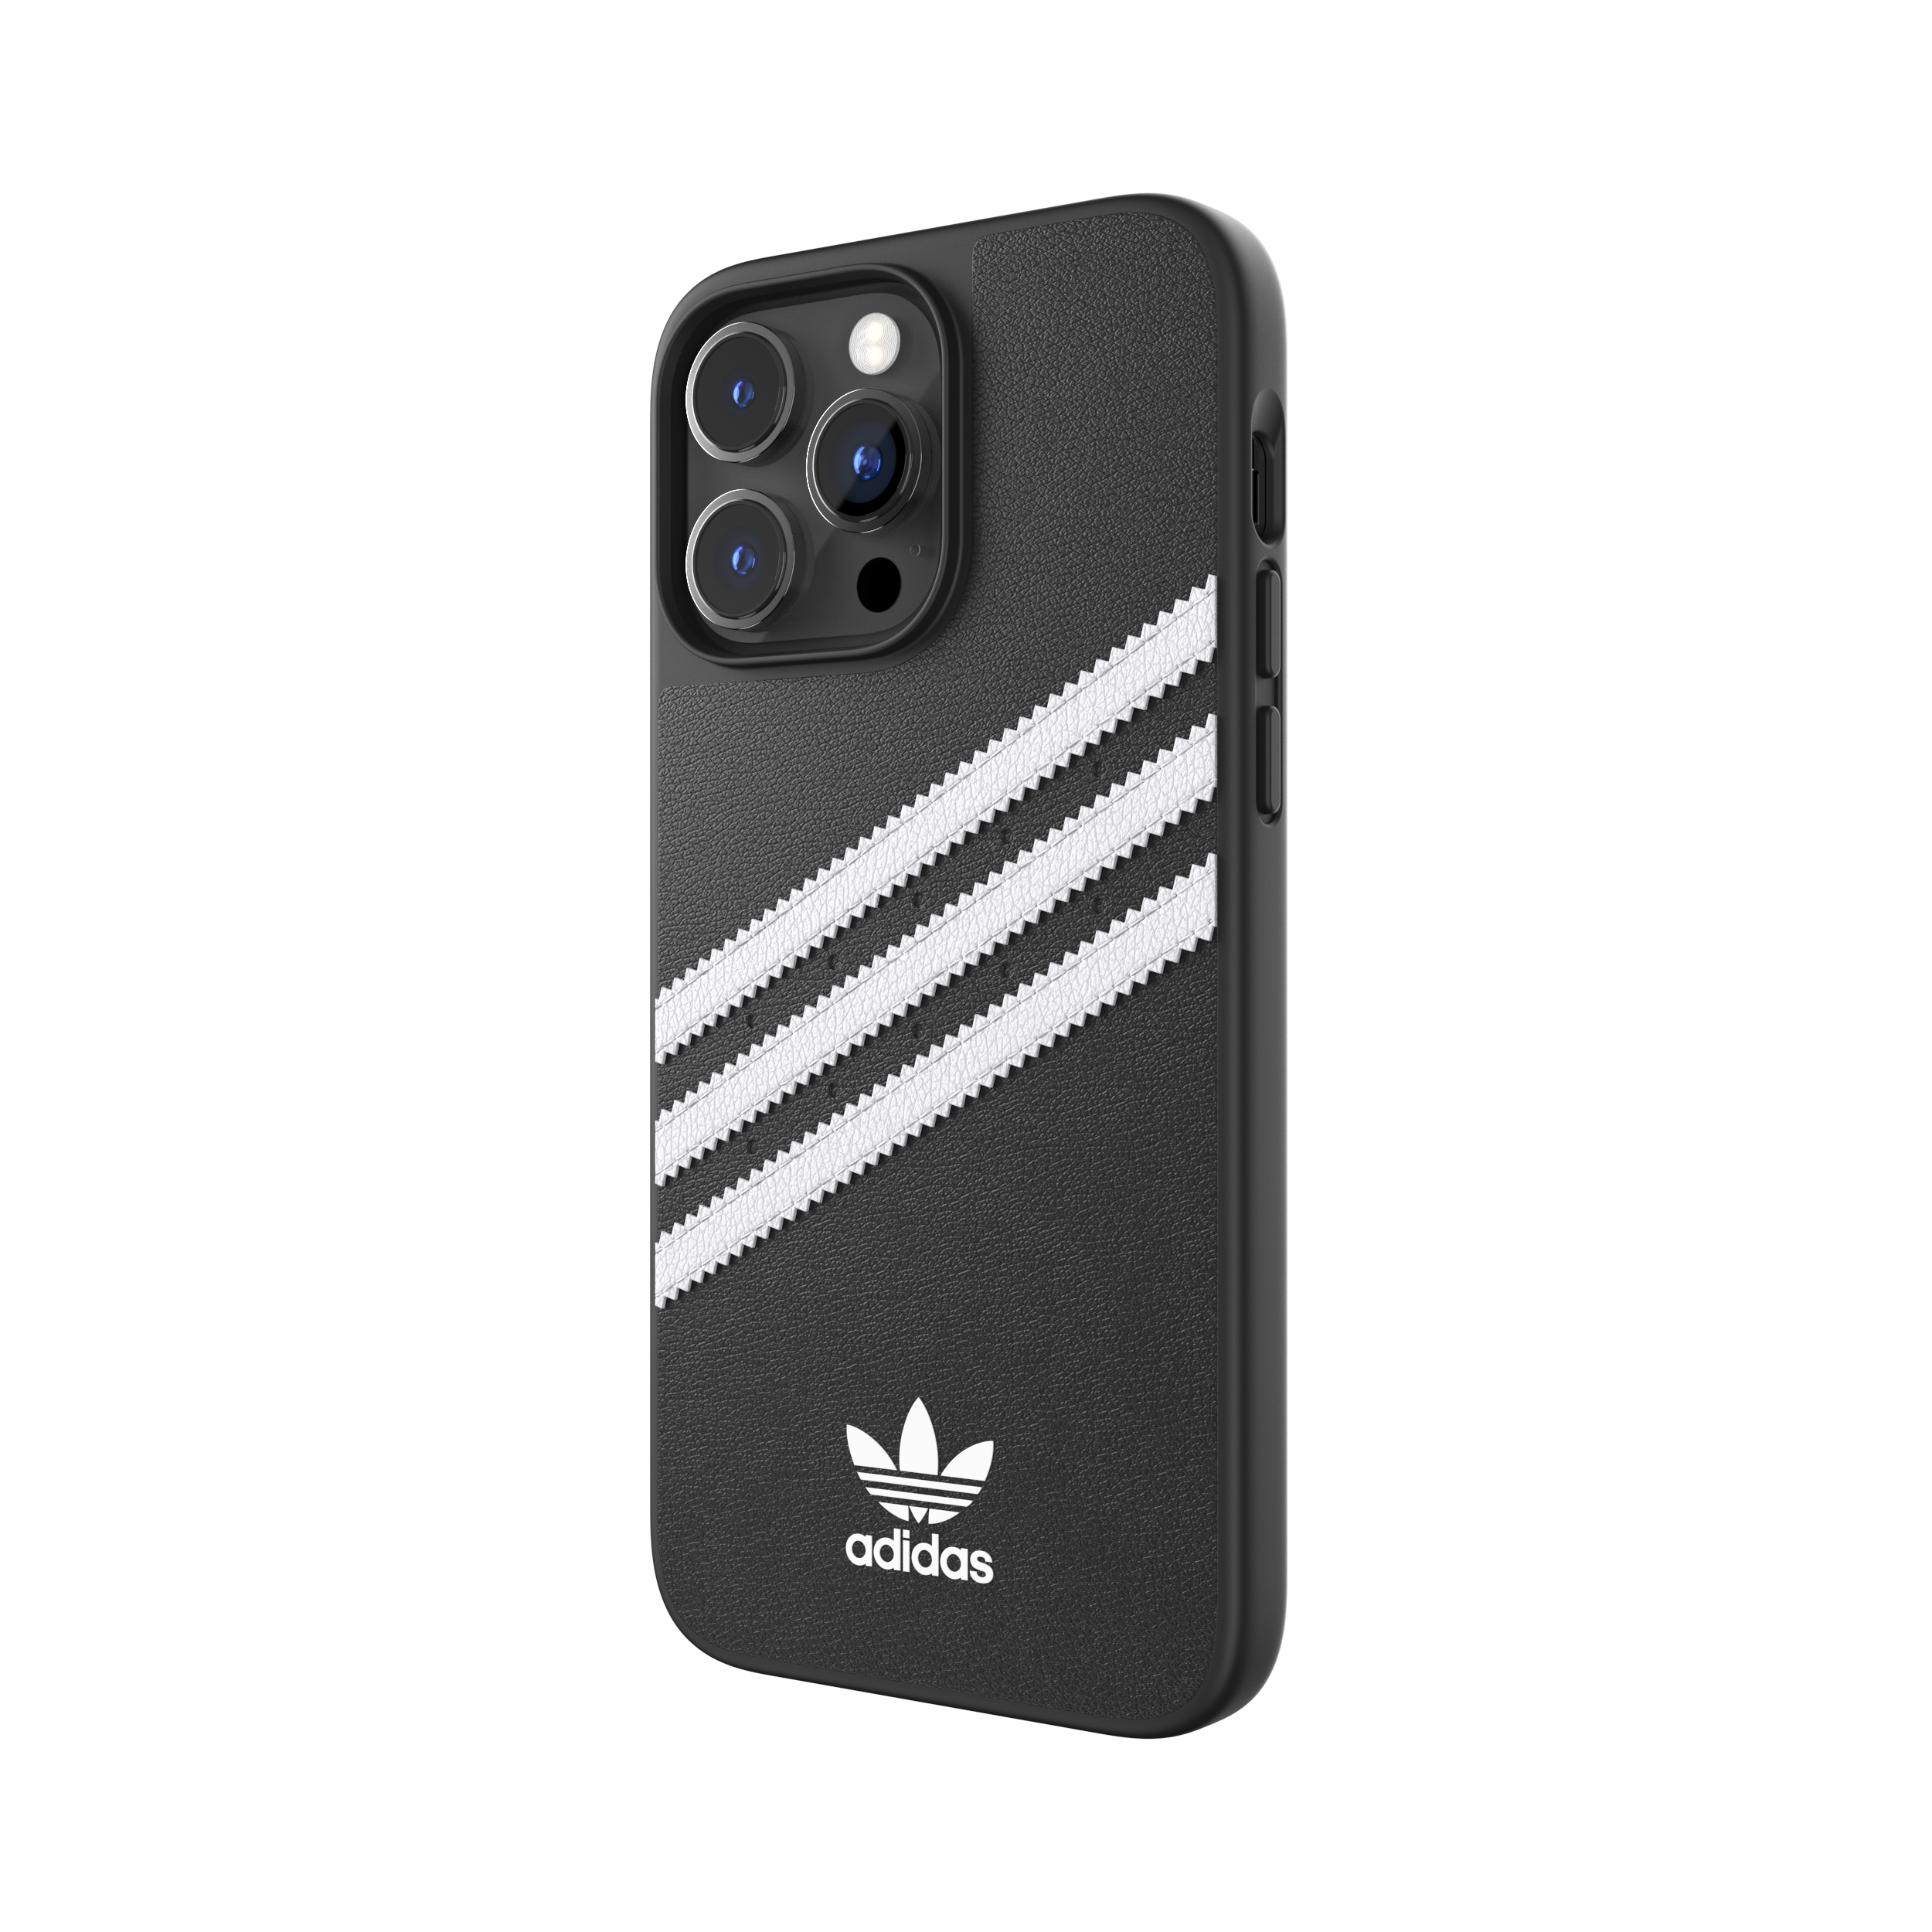 IPHONE MAX, PRO ADIDAS PU, 14 BLACK Case APPLE, Moulded Backcover,